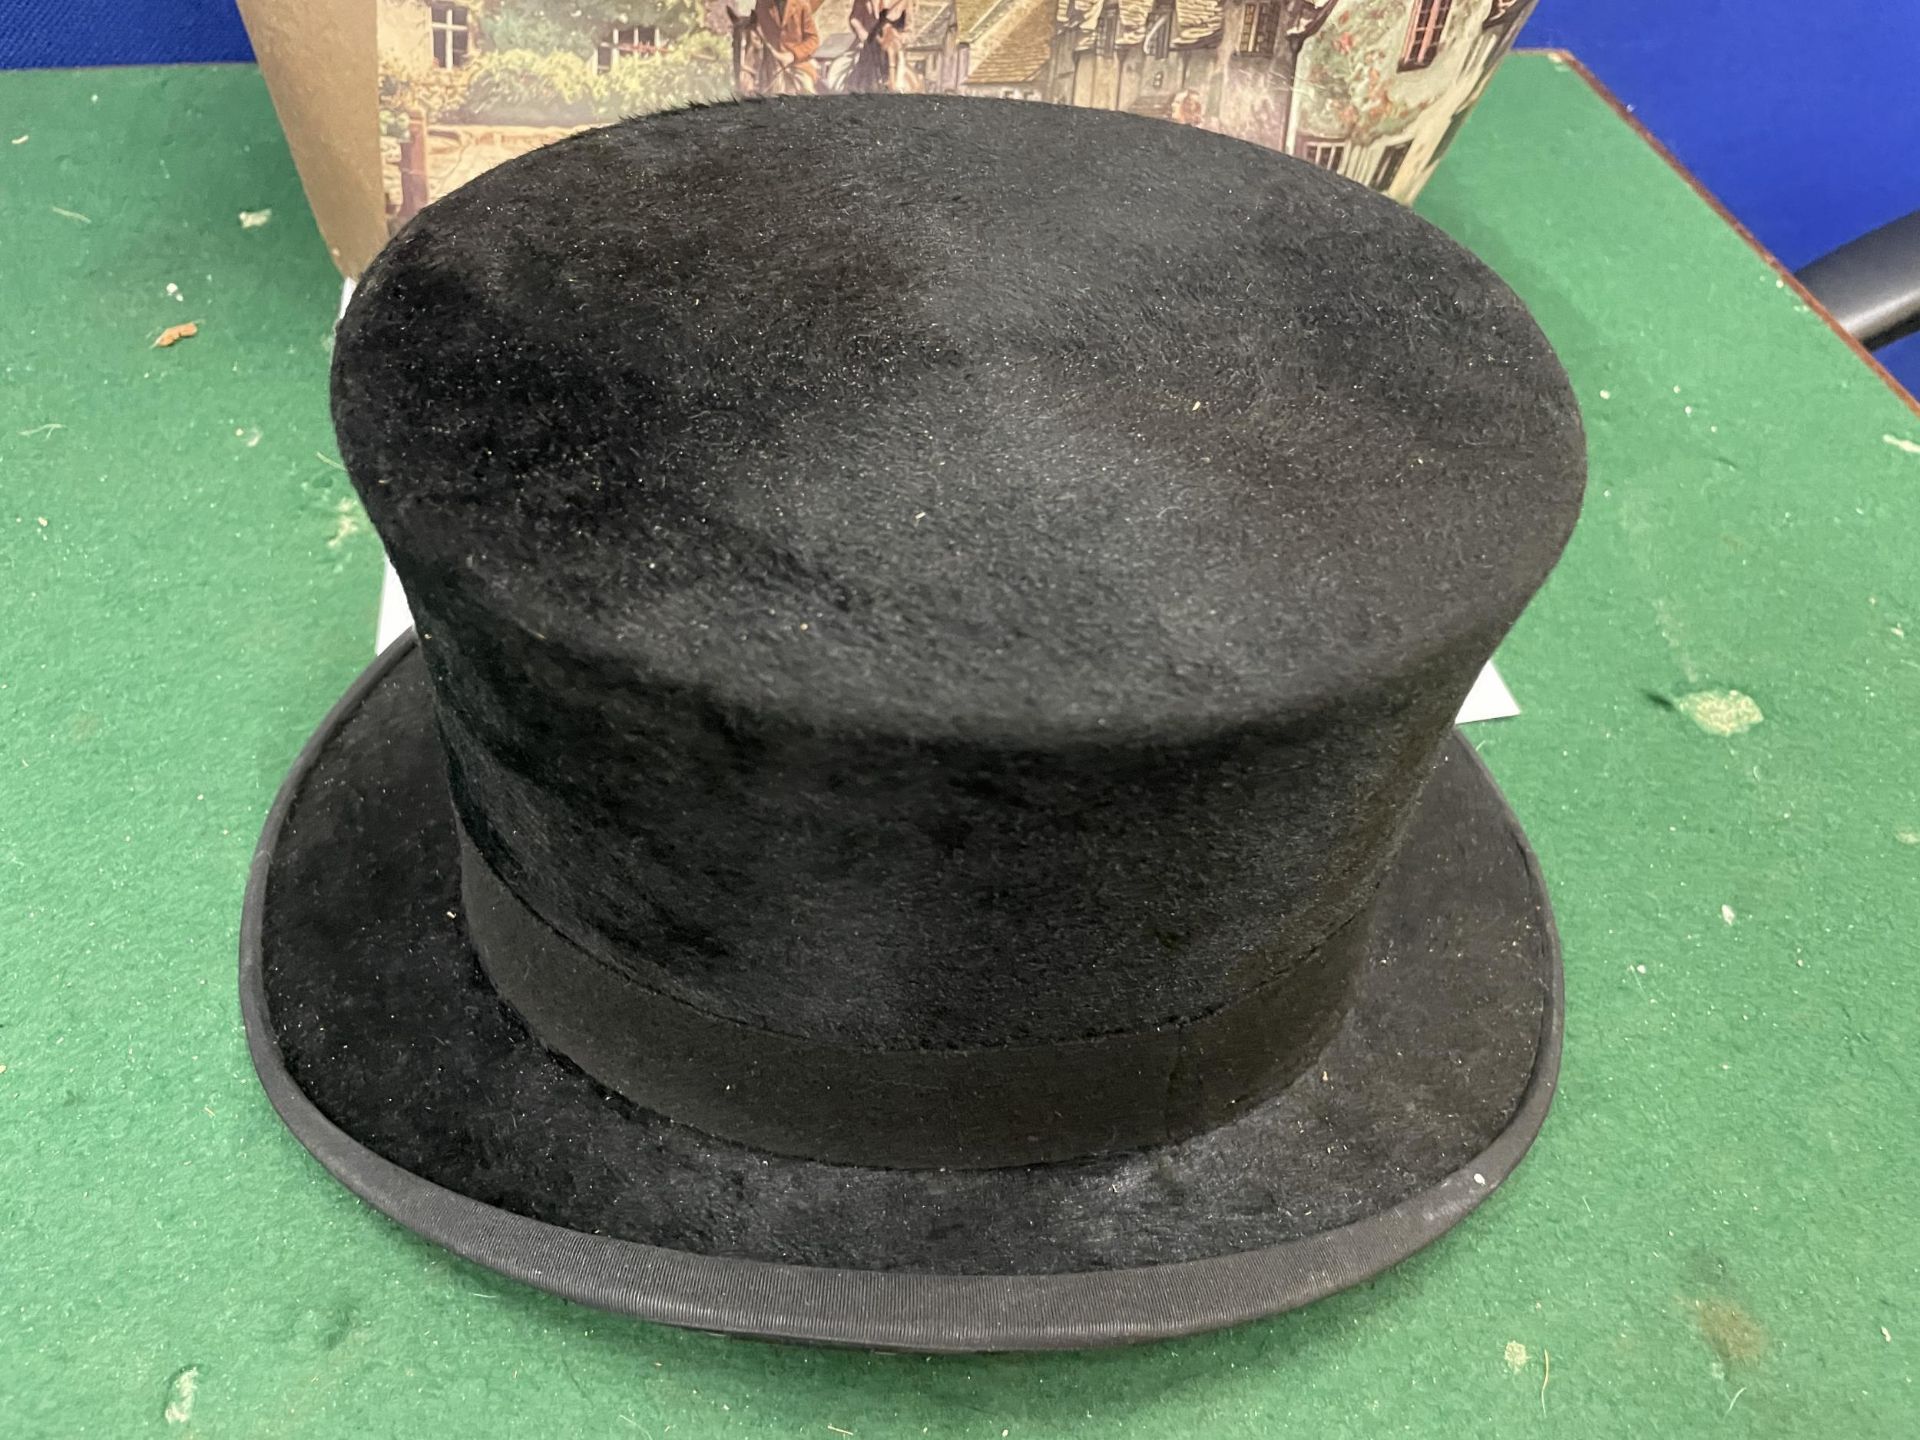 A DUNN & CO LONDON BLACK SILK TOP HAT WITH A BOX - Image 2 of 4